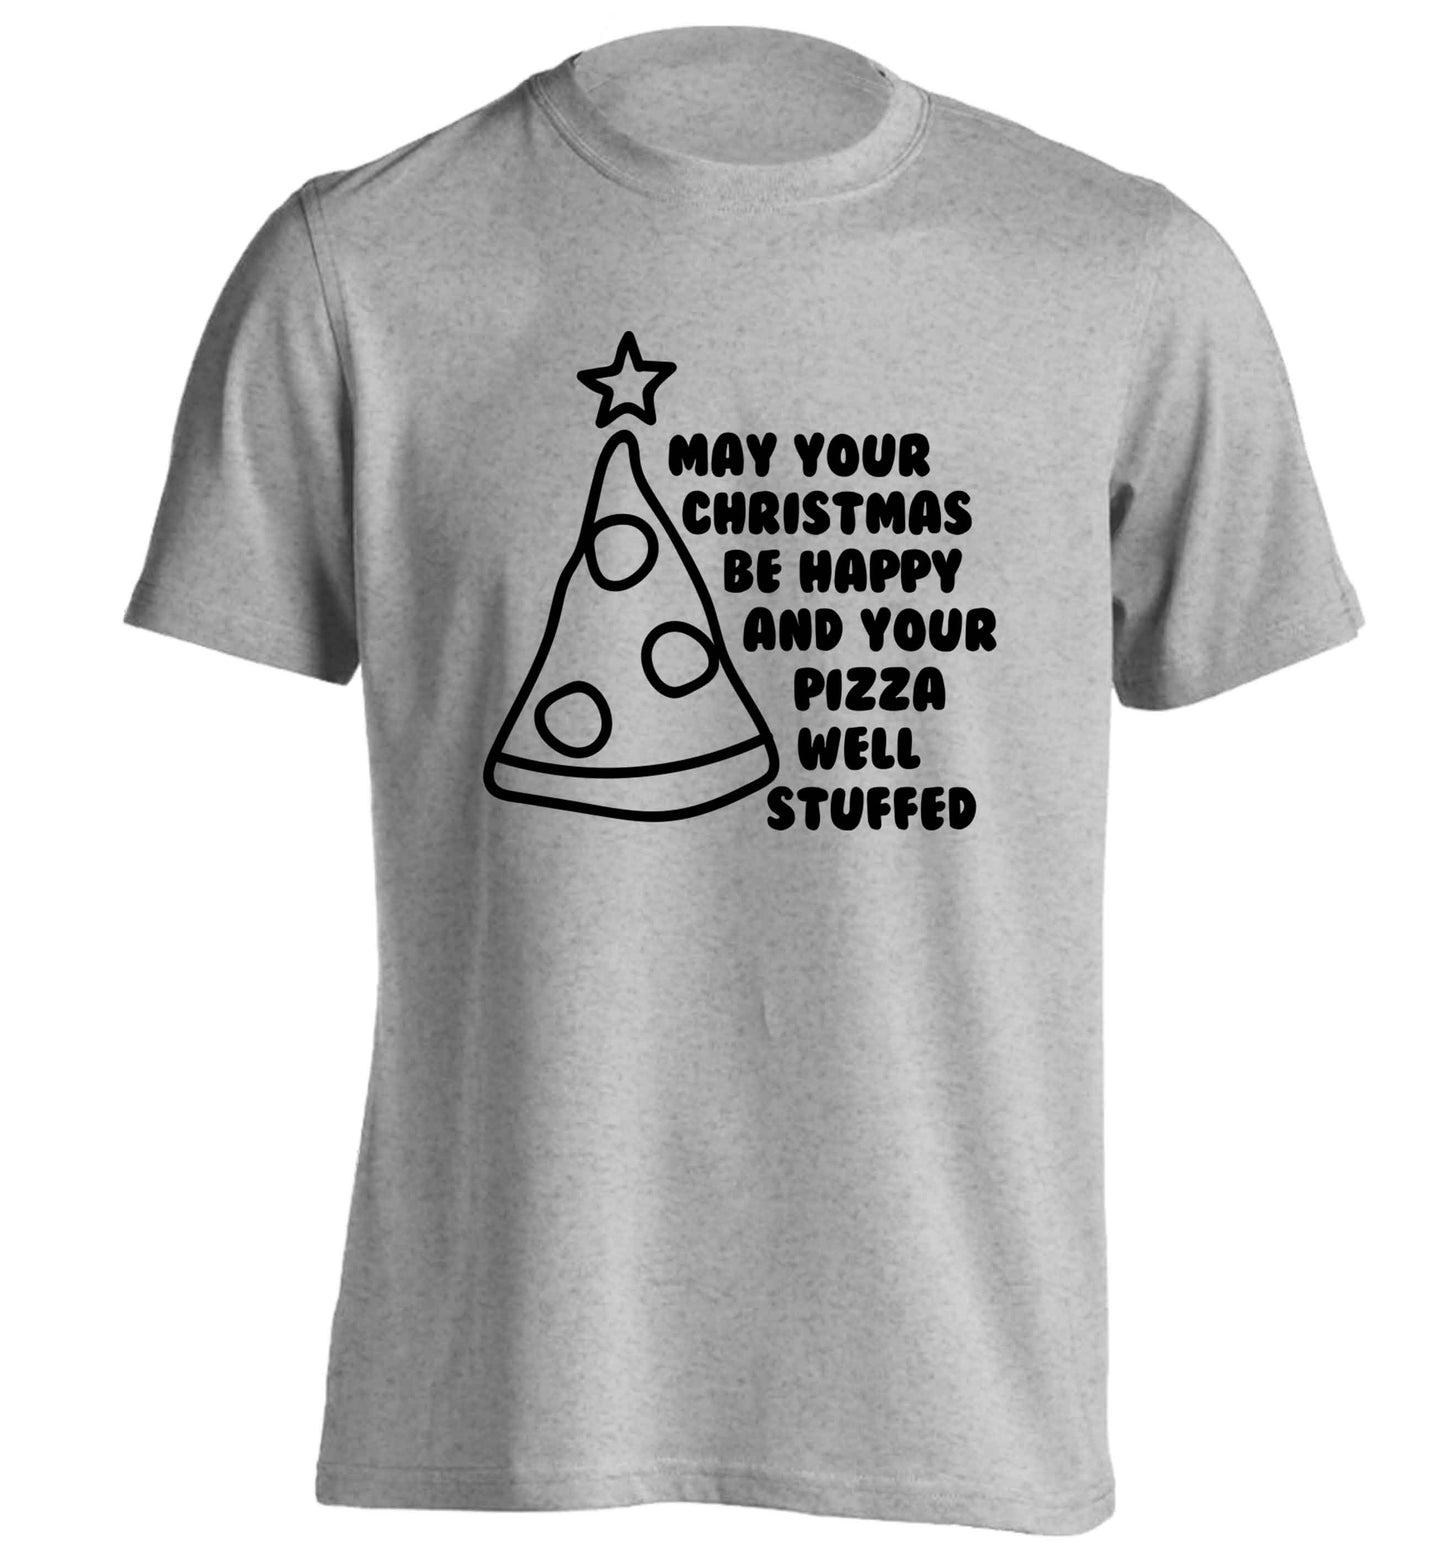 May your Christmas be happy and your pizza well stuffed adults unisex grey Tshirt 2XL